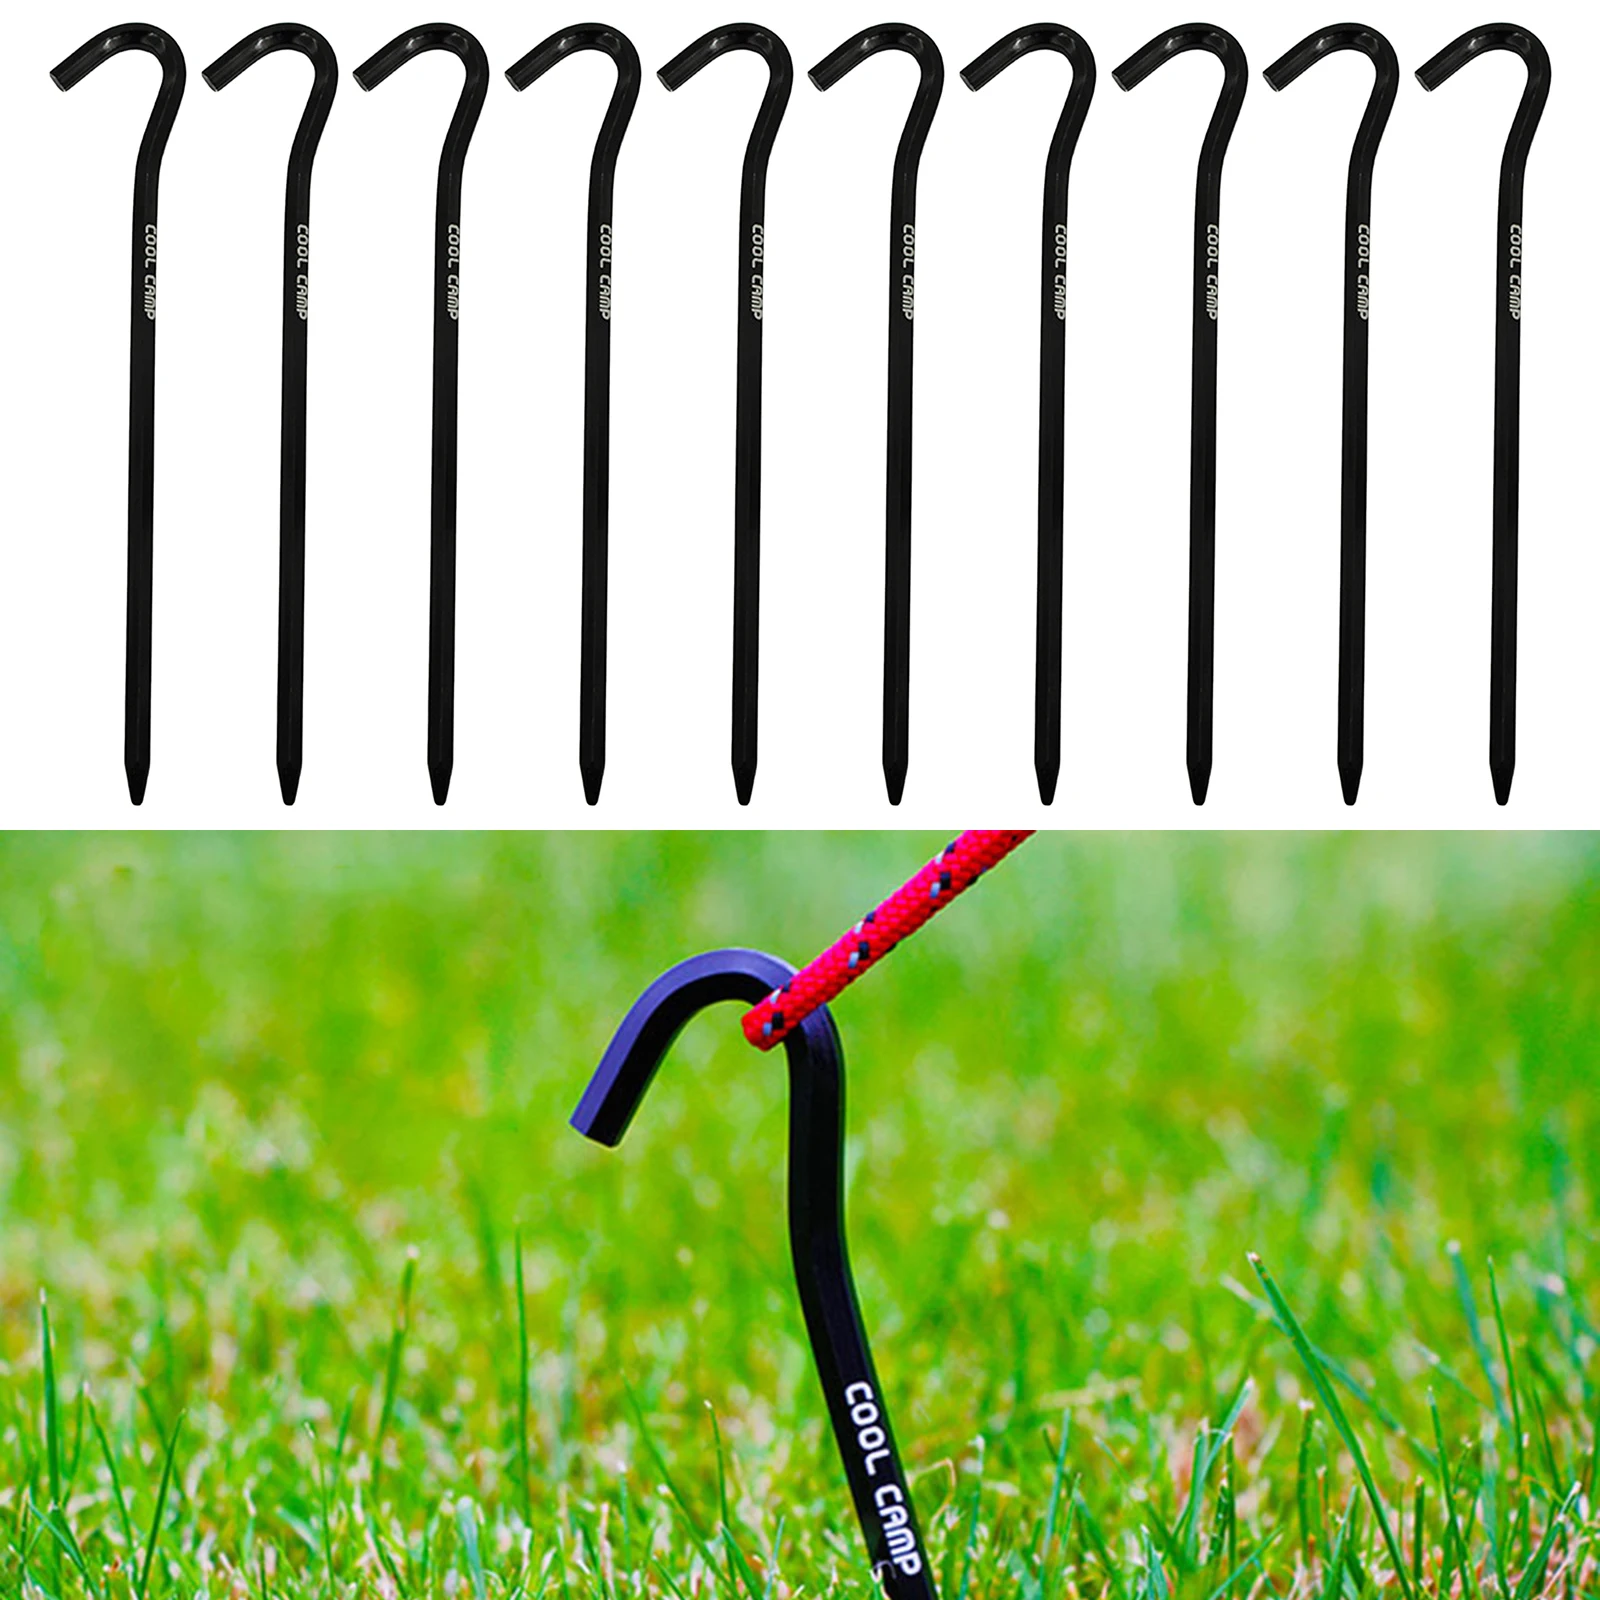 10pcs Tent Camping Pegs Nails Metal Aluminium Alloy Durable Heavy Duty For Outdoor Hiking Ground Stakes